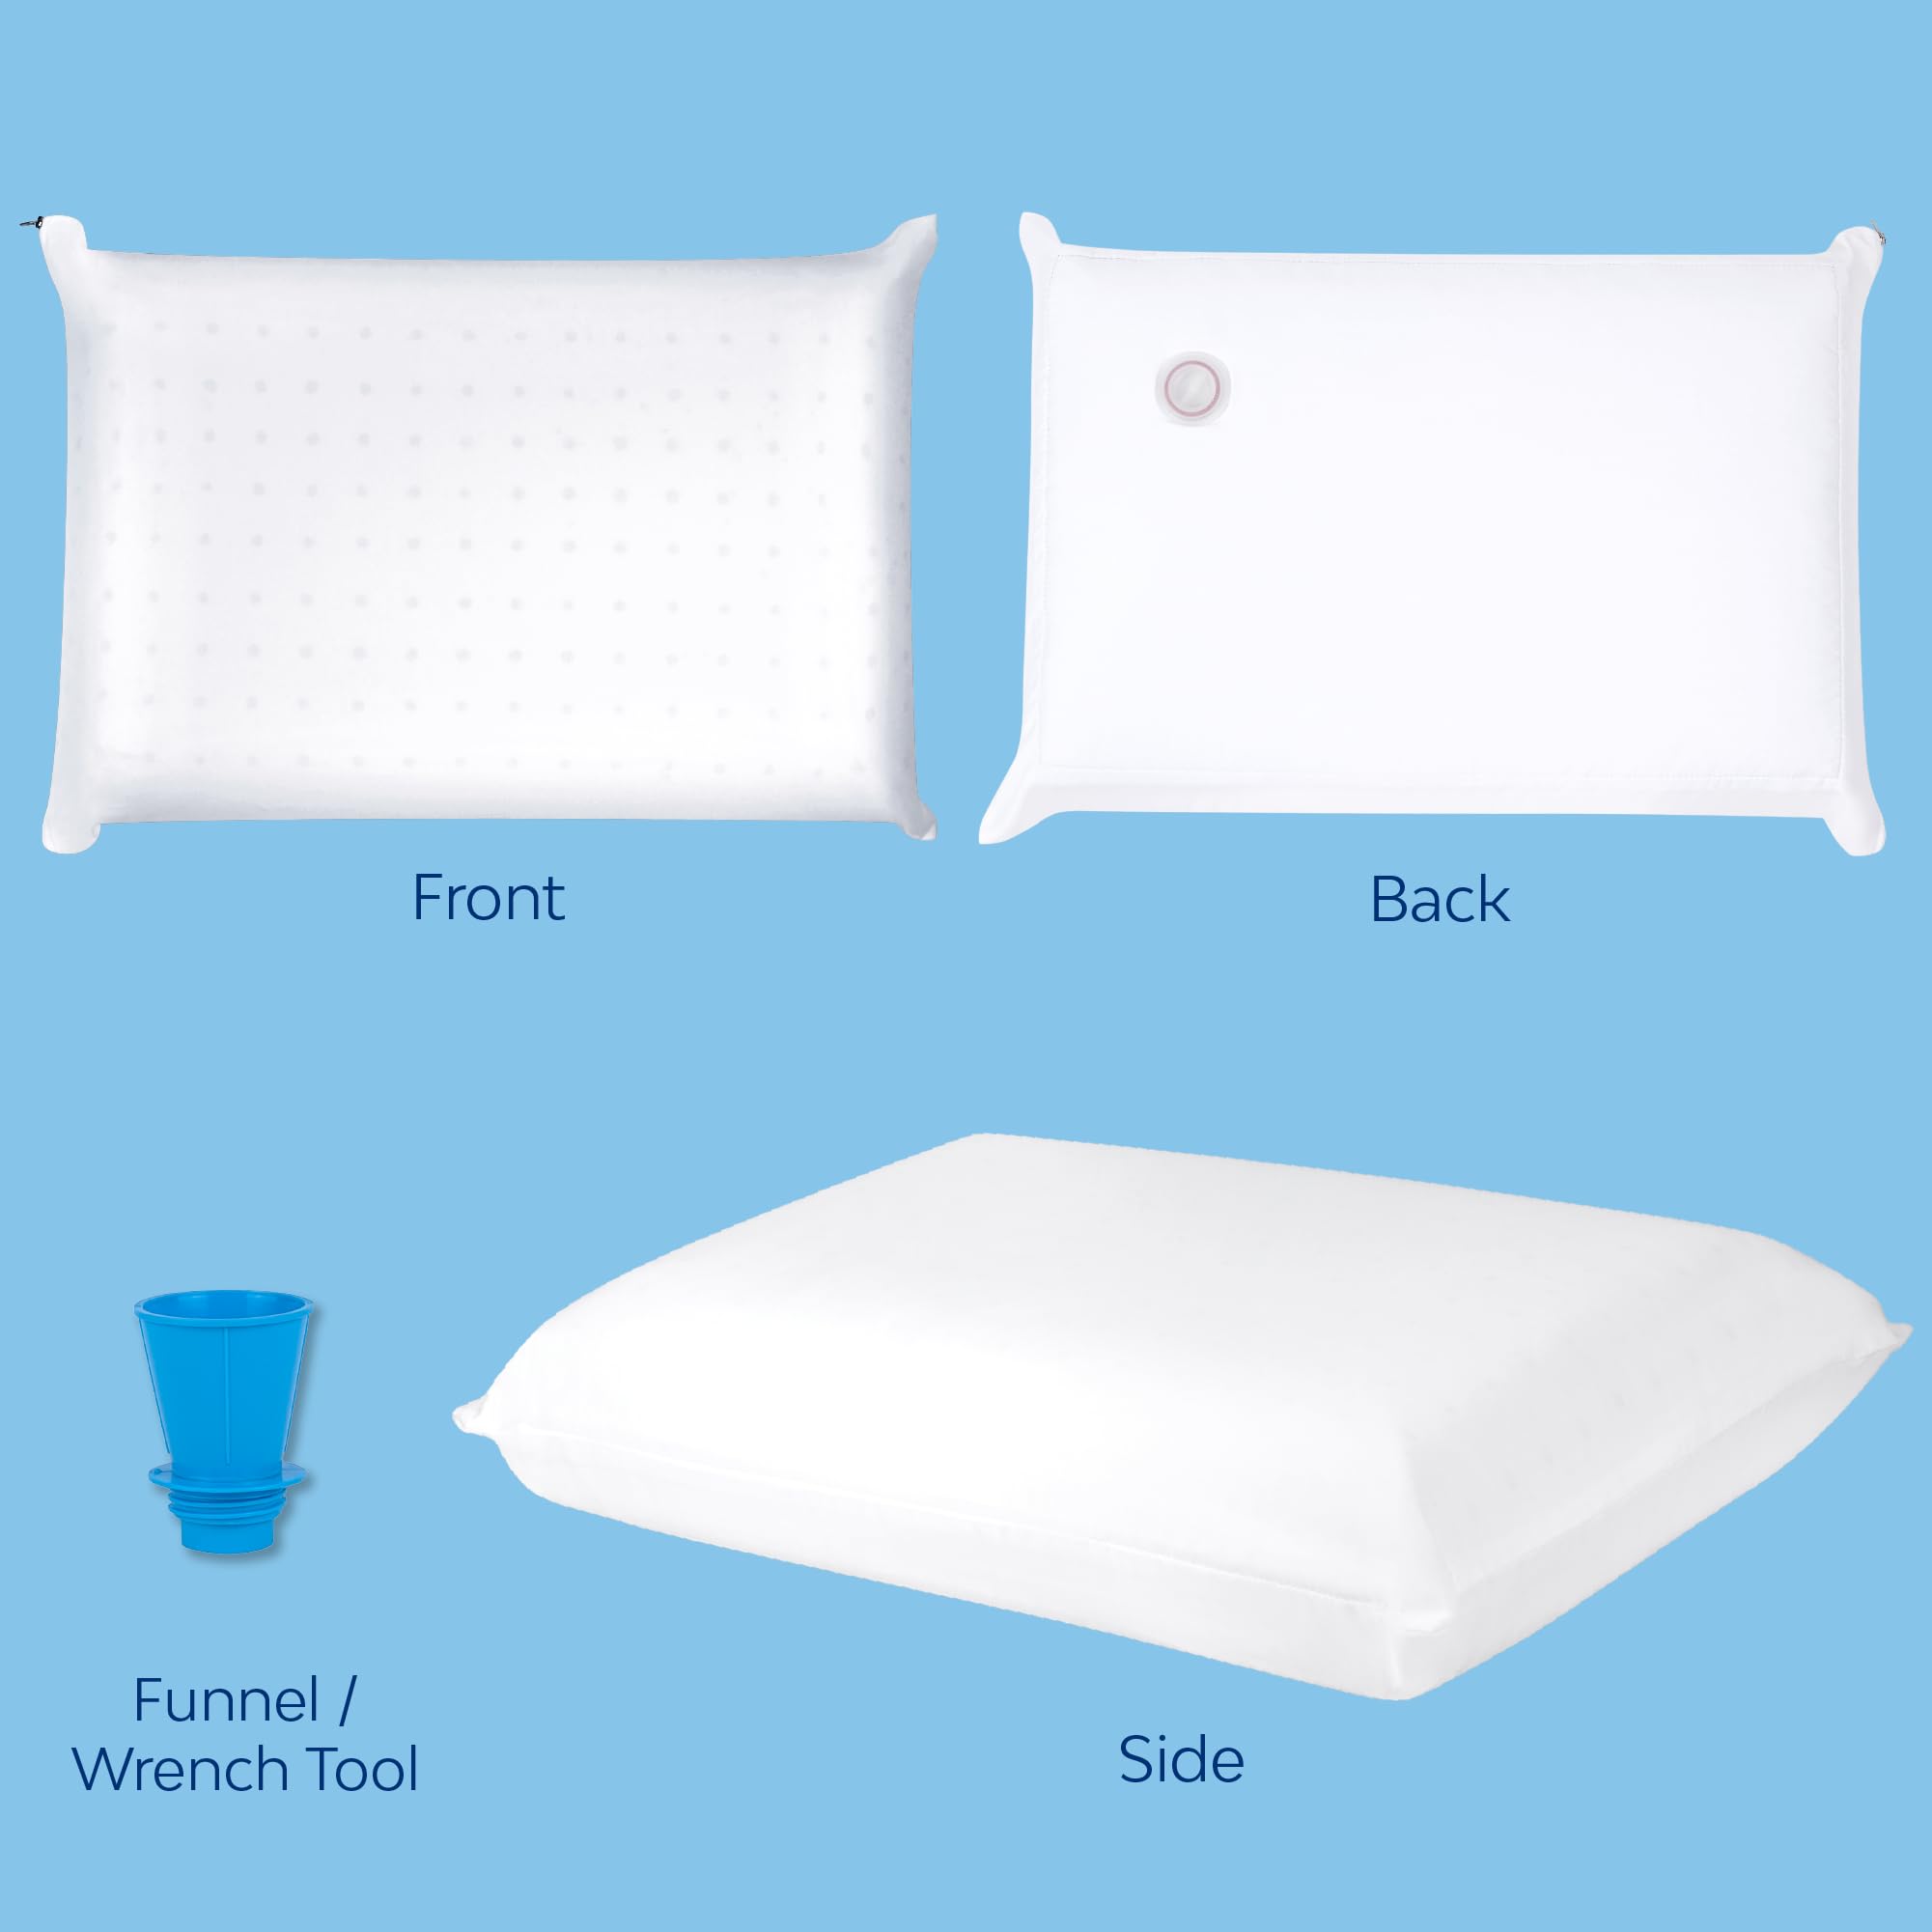 Mediflow Water Pillow Memory Foam re-Invented with Waterbase Technology - Clinically Proven to Reduce Neck Pain & Improve Sleep Quality. (Single Pack)